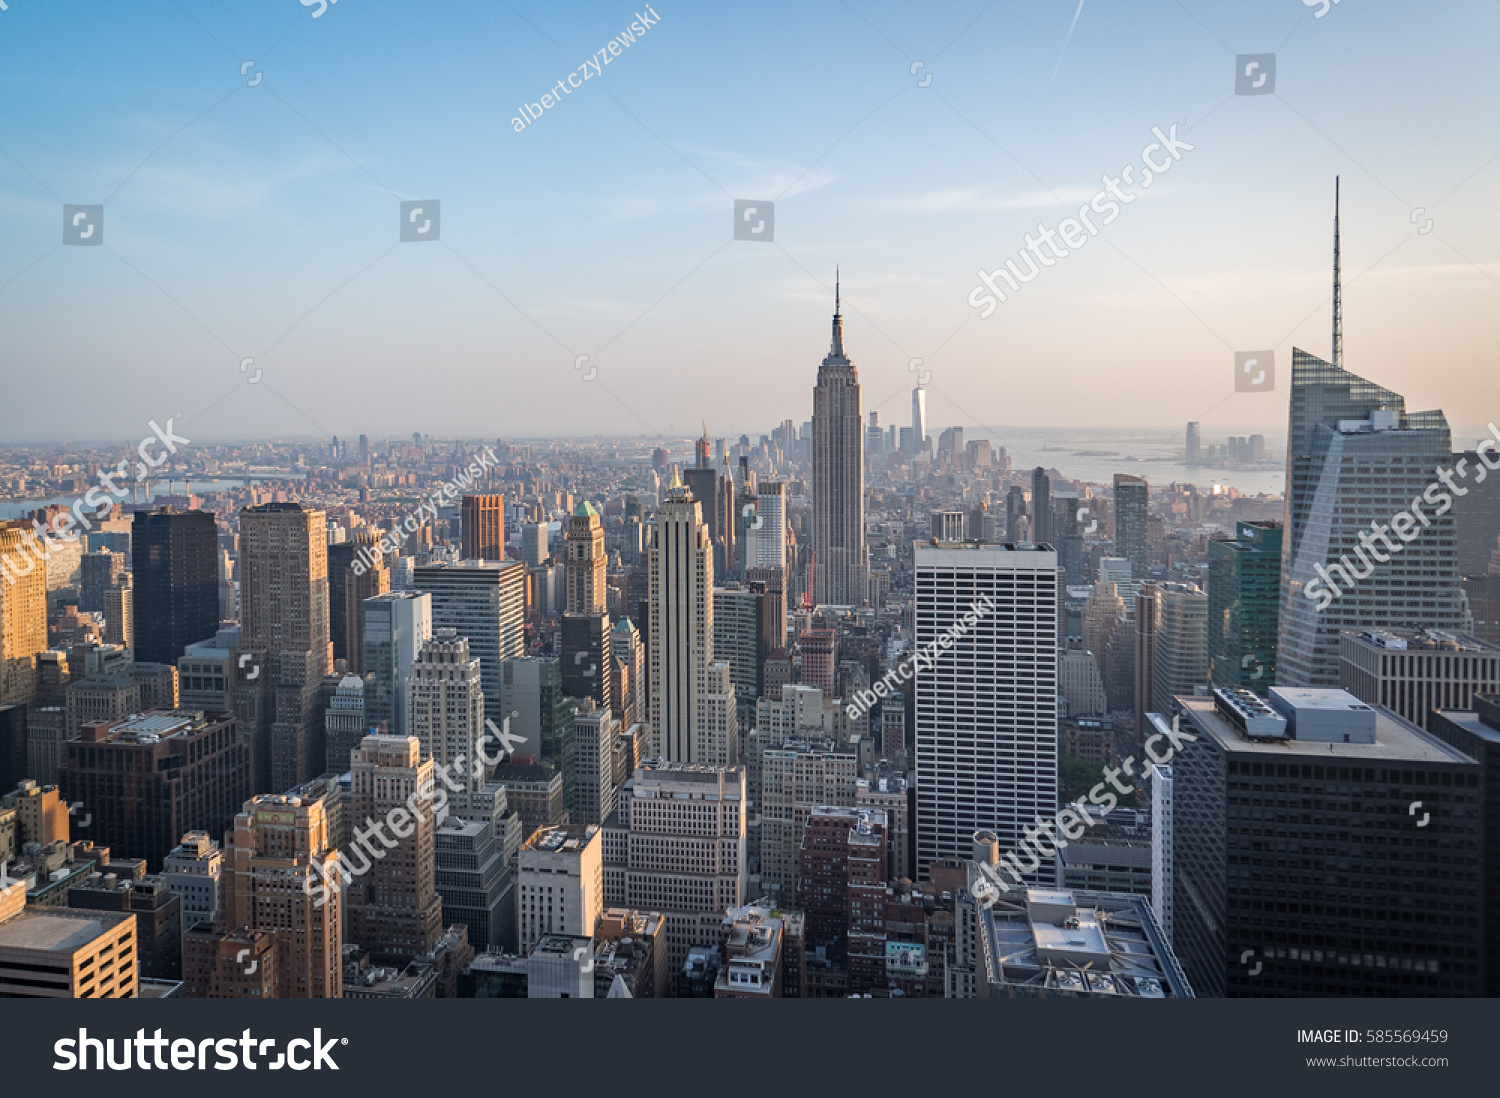 Aerial view of Manhattan skyline, New York City, USA during afternoon #585569459